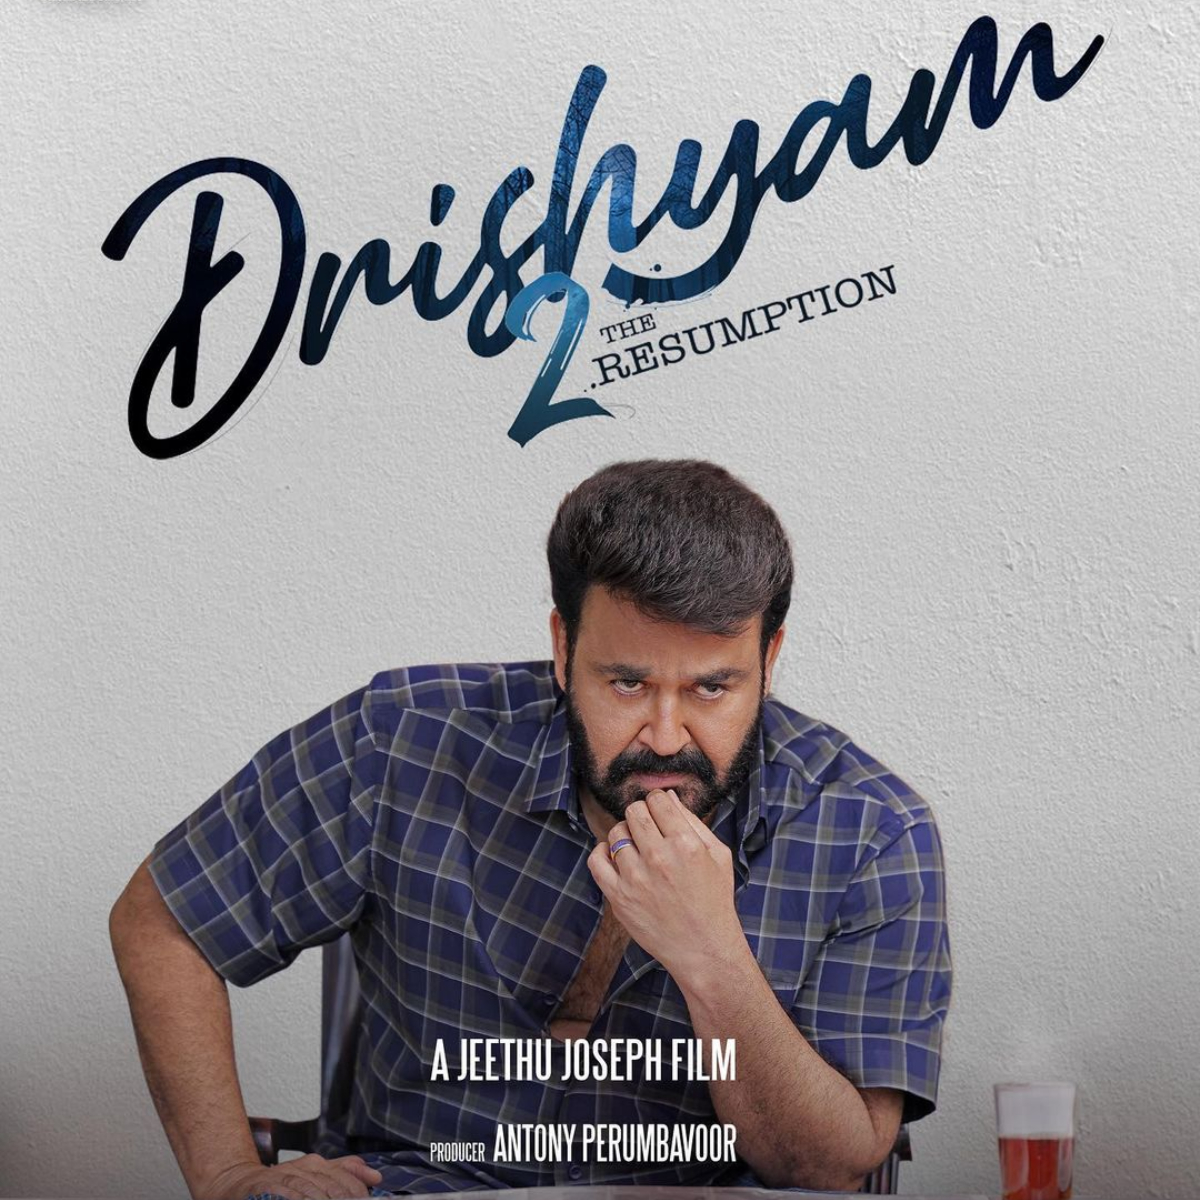 EXCLUSIVE: Are you a fan of Drishyam? Kumar Mangat now bags Hindi remake rights of Mohanlal starrer Drishyam 2